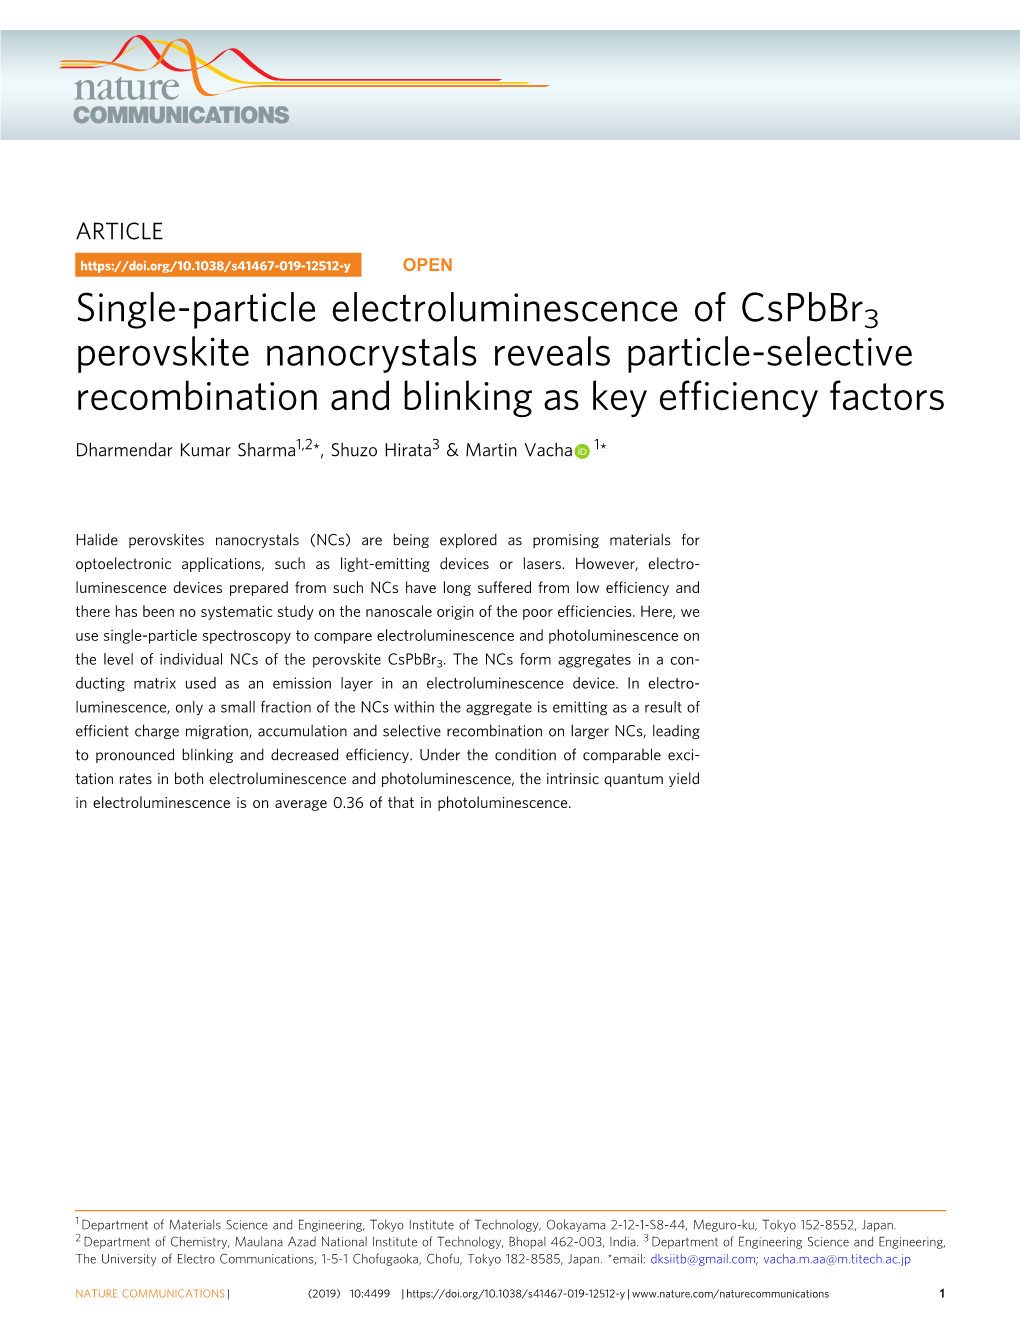 Single-Particle Electroluminescence of Cspbbr3 Perovskite Nanocrystals Reveals Particle-Selective Recombination and Blinking As Key Efﬁciency Factors